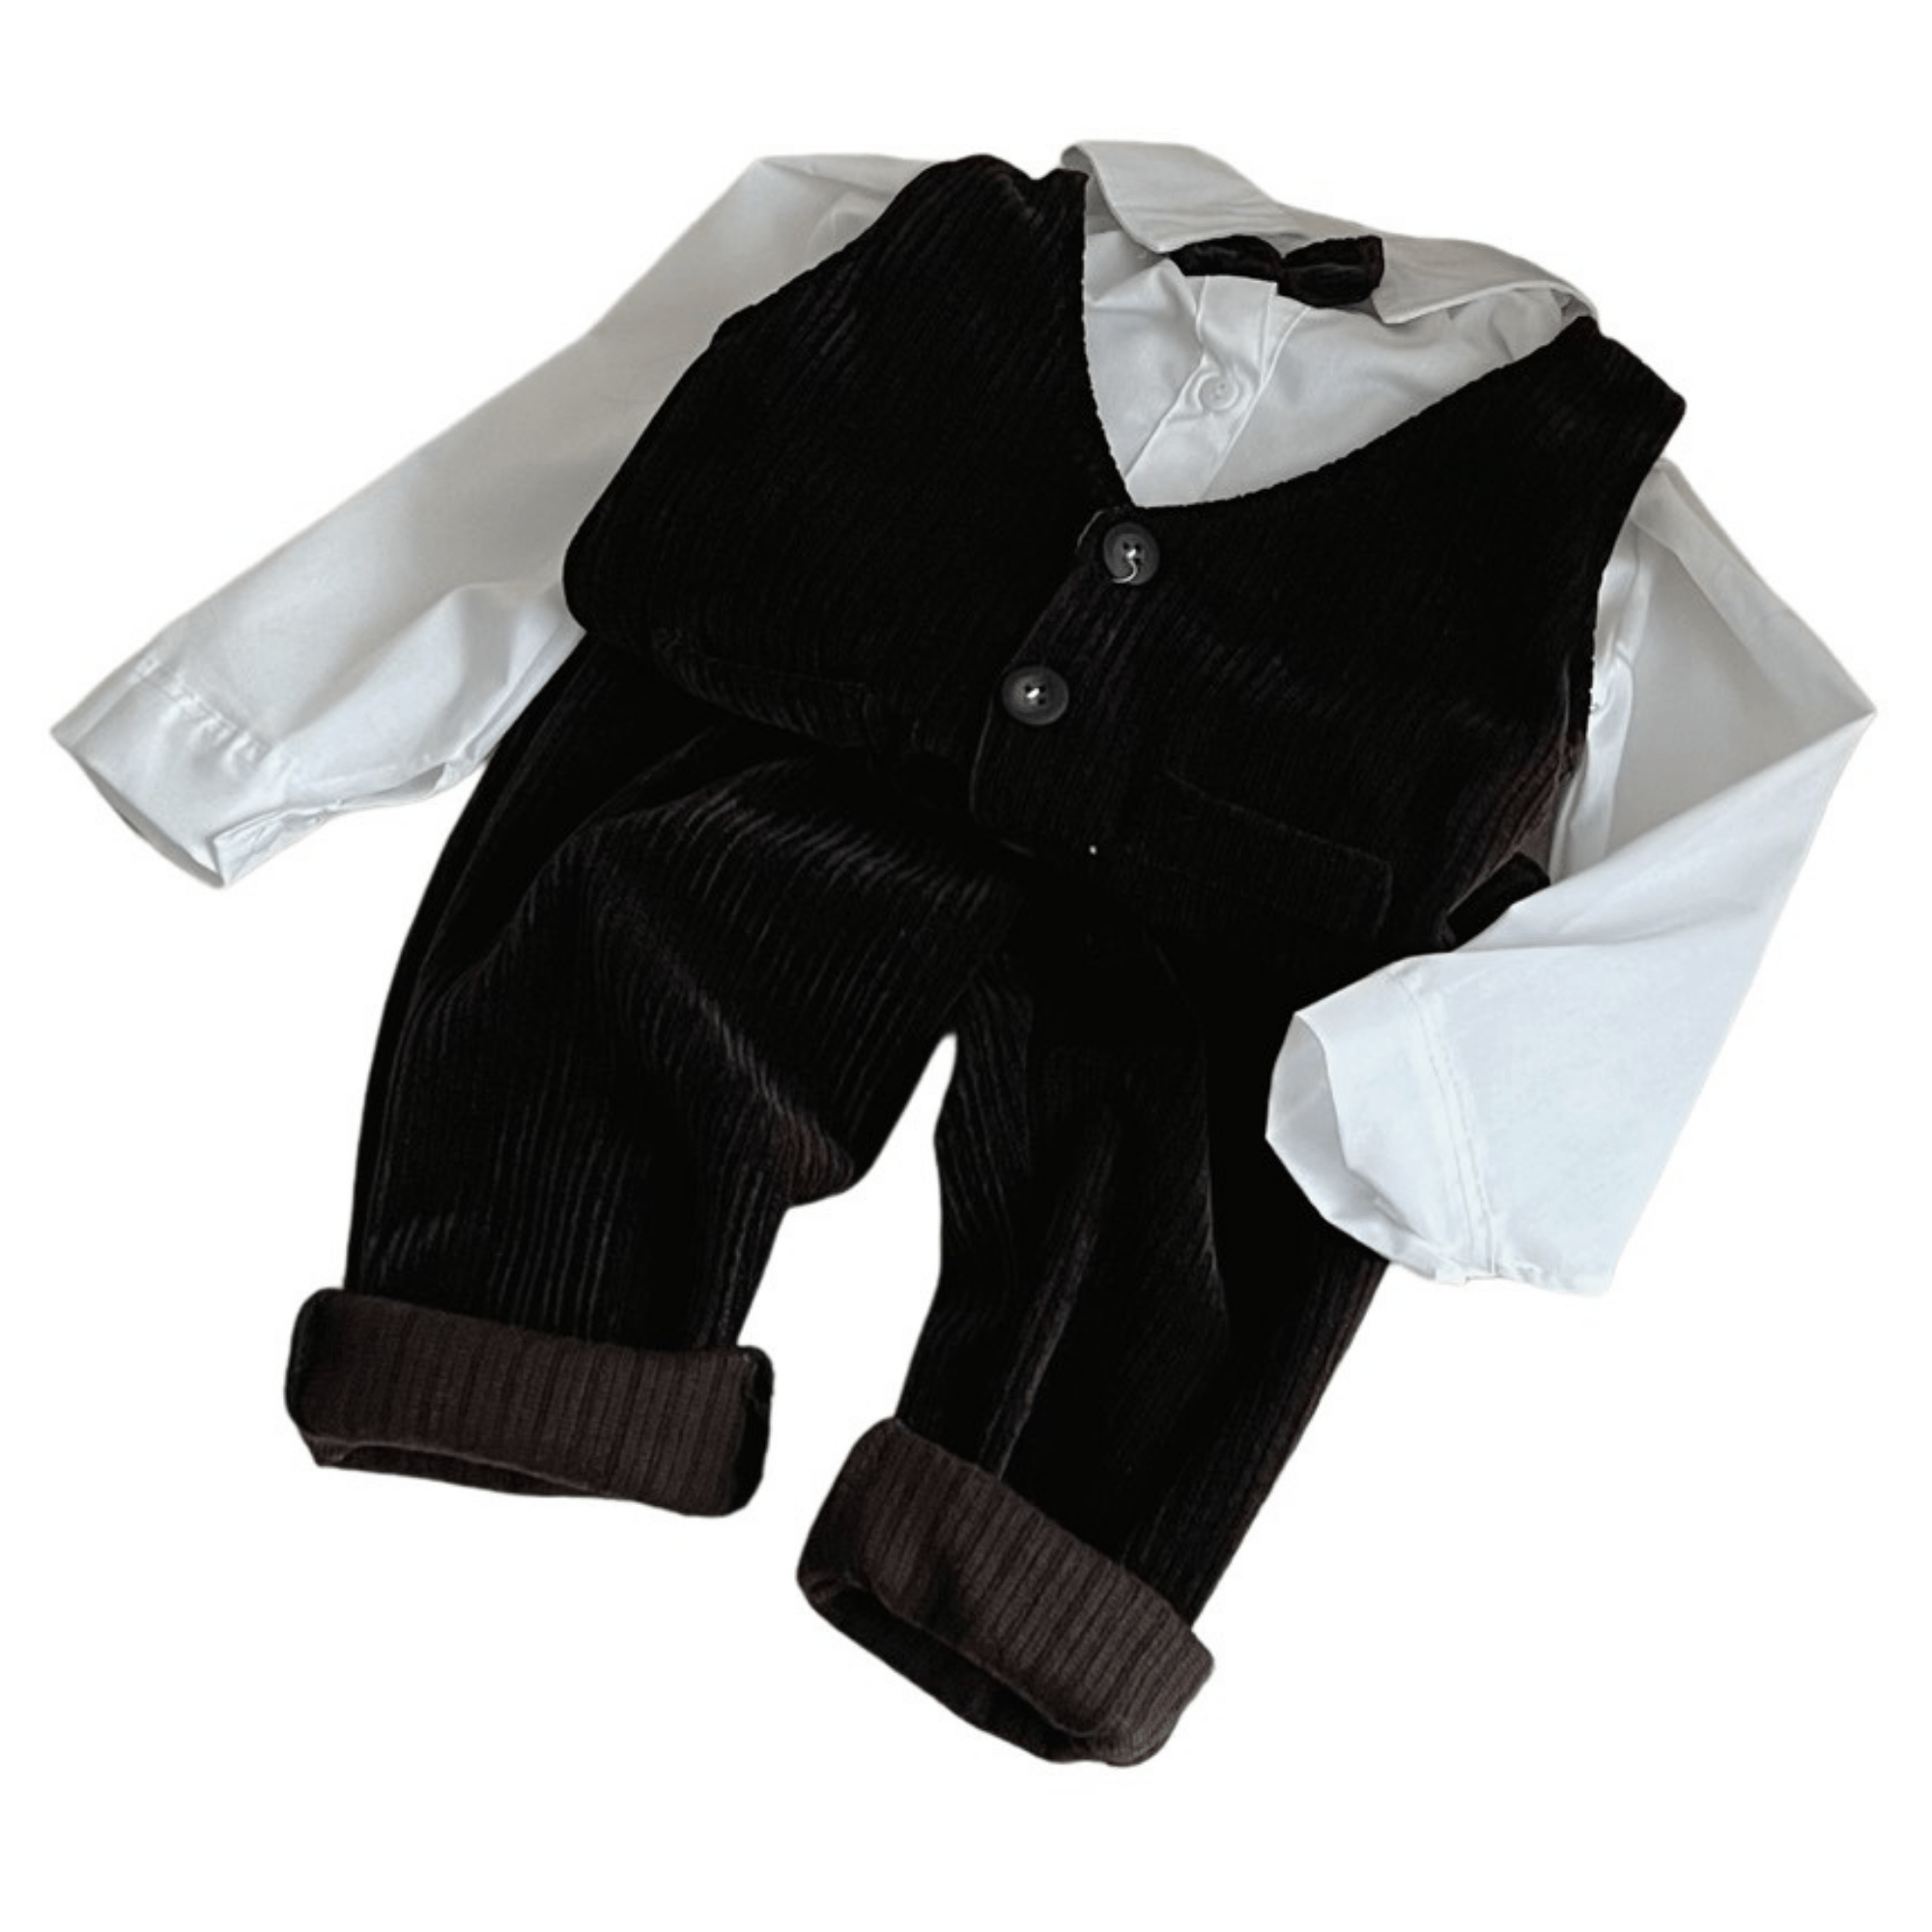 Winter Clothes For Kids Factory Price Wool Baby Boys Set Casual Each One In Opp Bag Vietnam Manufacturer